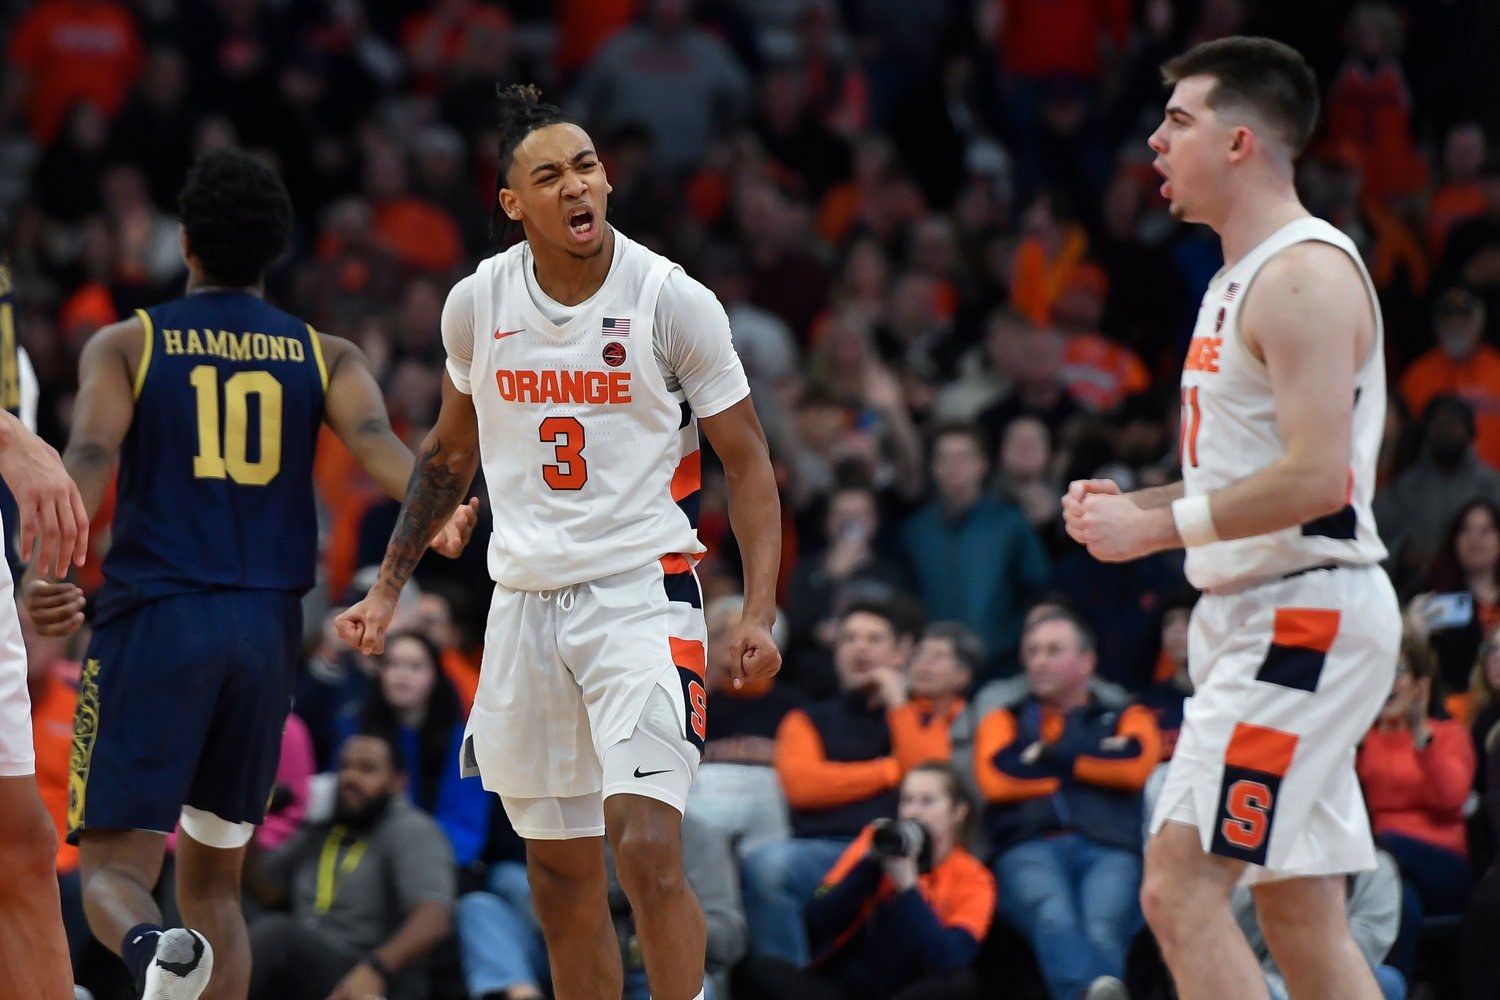 Syracuse guard Judah Mintz (3) celebrates with guard Joseph Girard III after the team's win over Notre Dame on Saturday night in Syracuse. The Orange won 78-73.